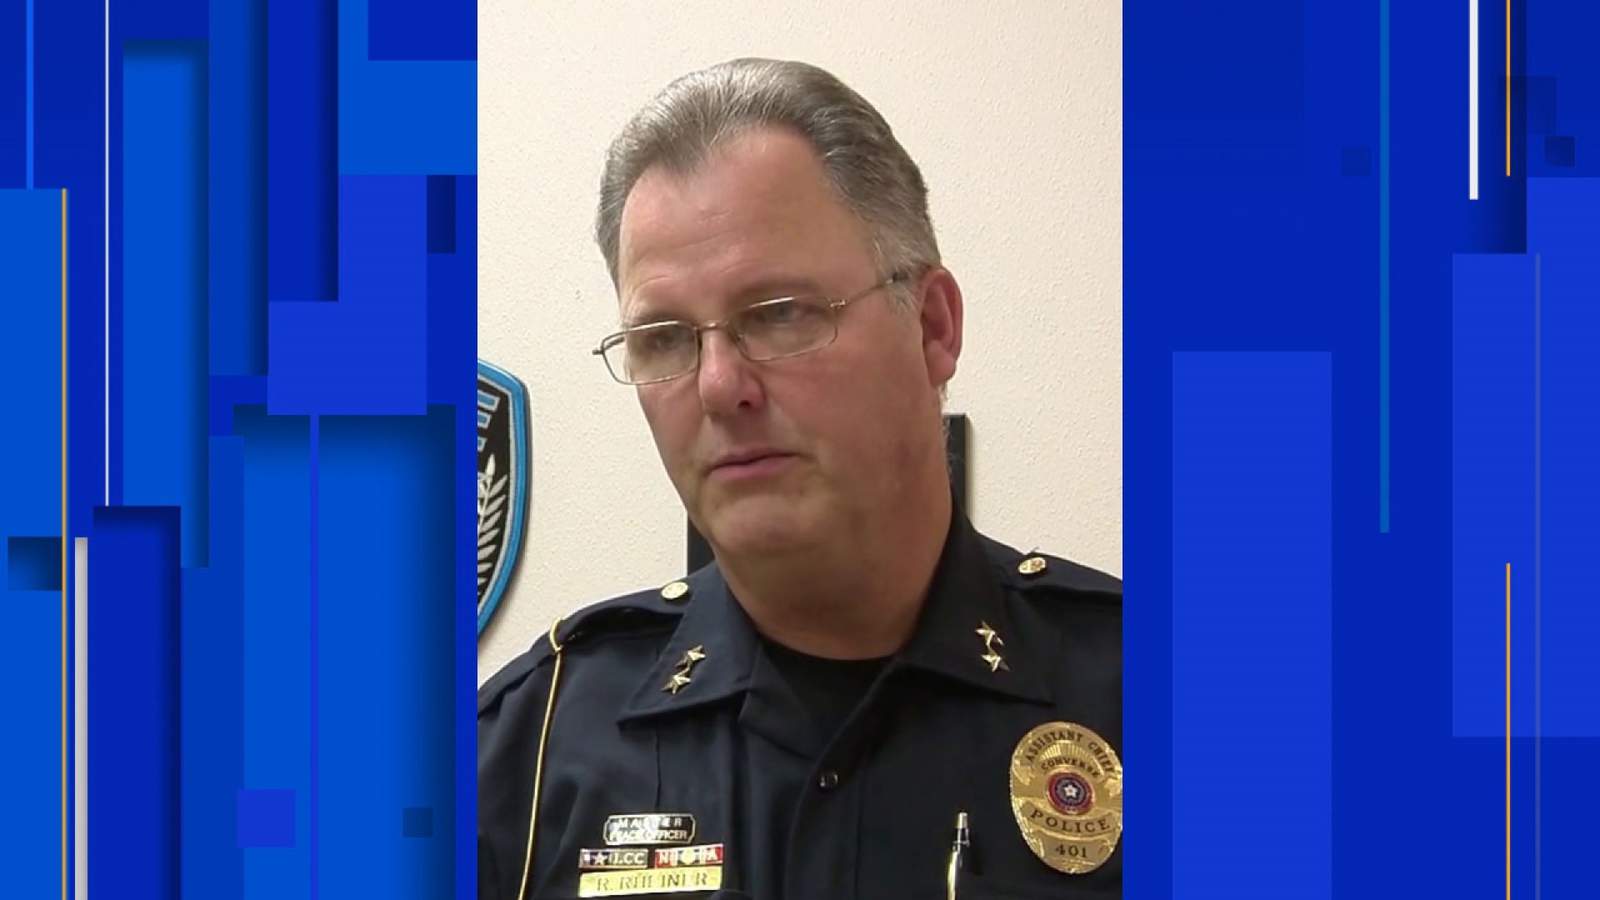 Colleagues, friends remember accomplishments of retired Converse asst. police chief killed by suspected drunk driver